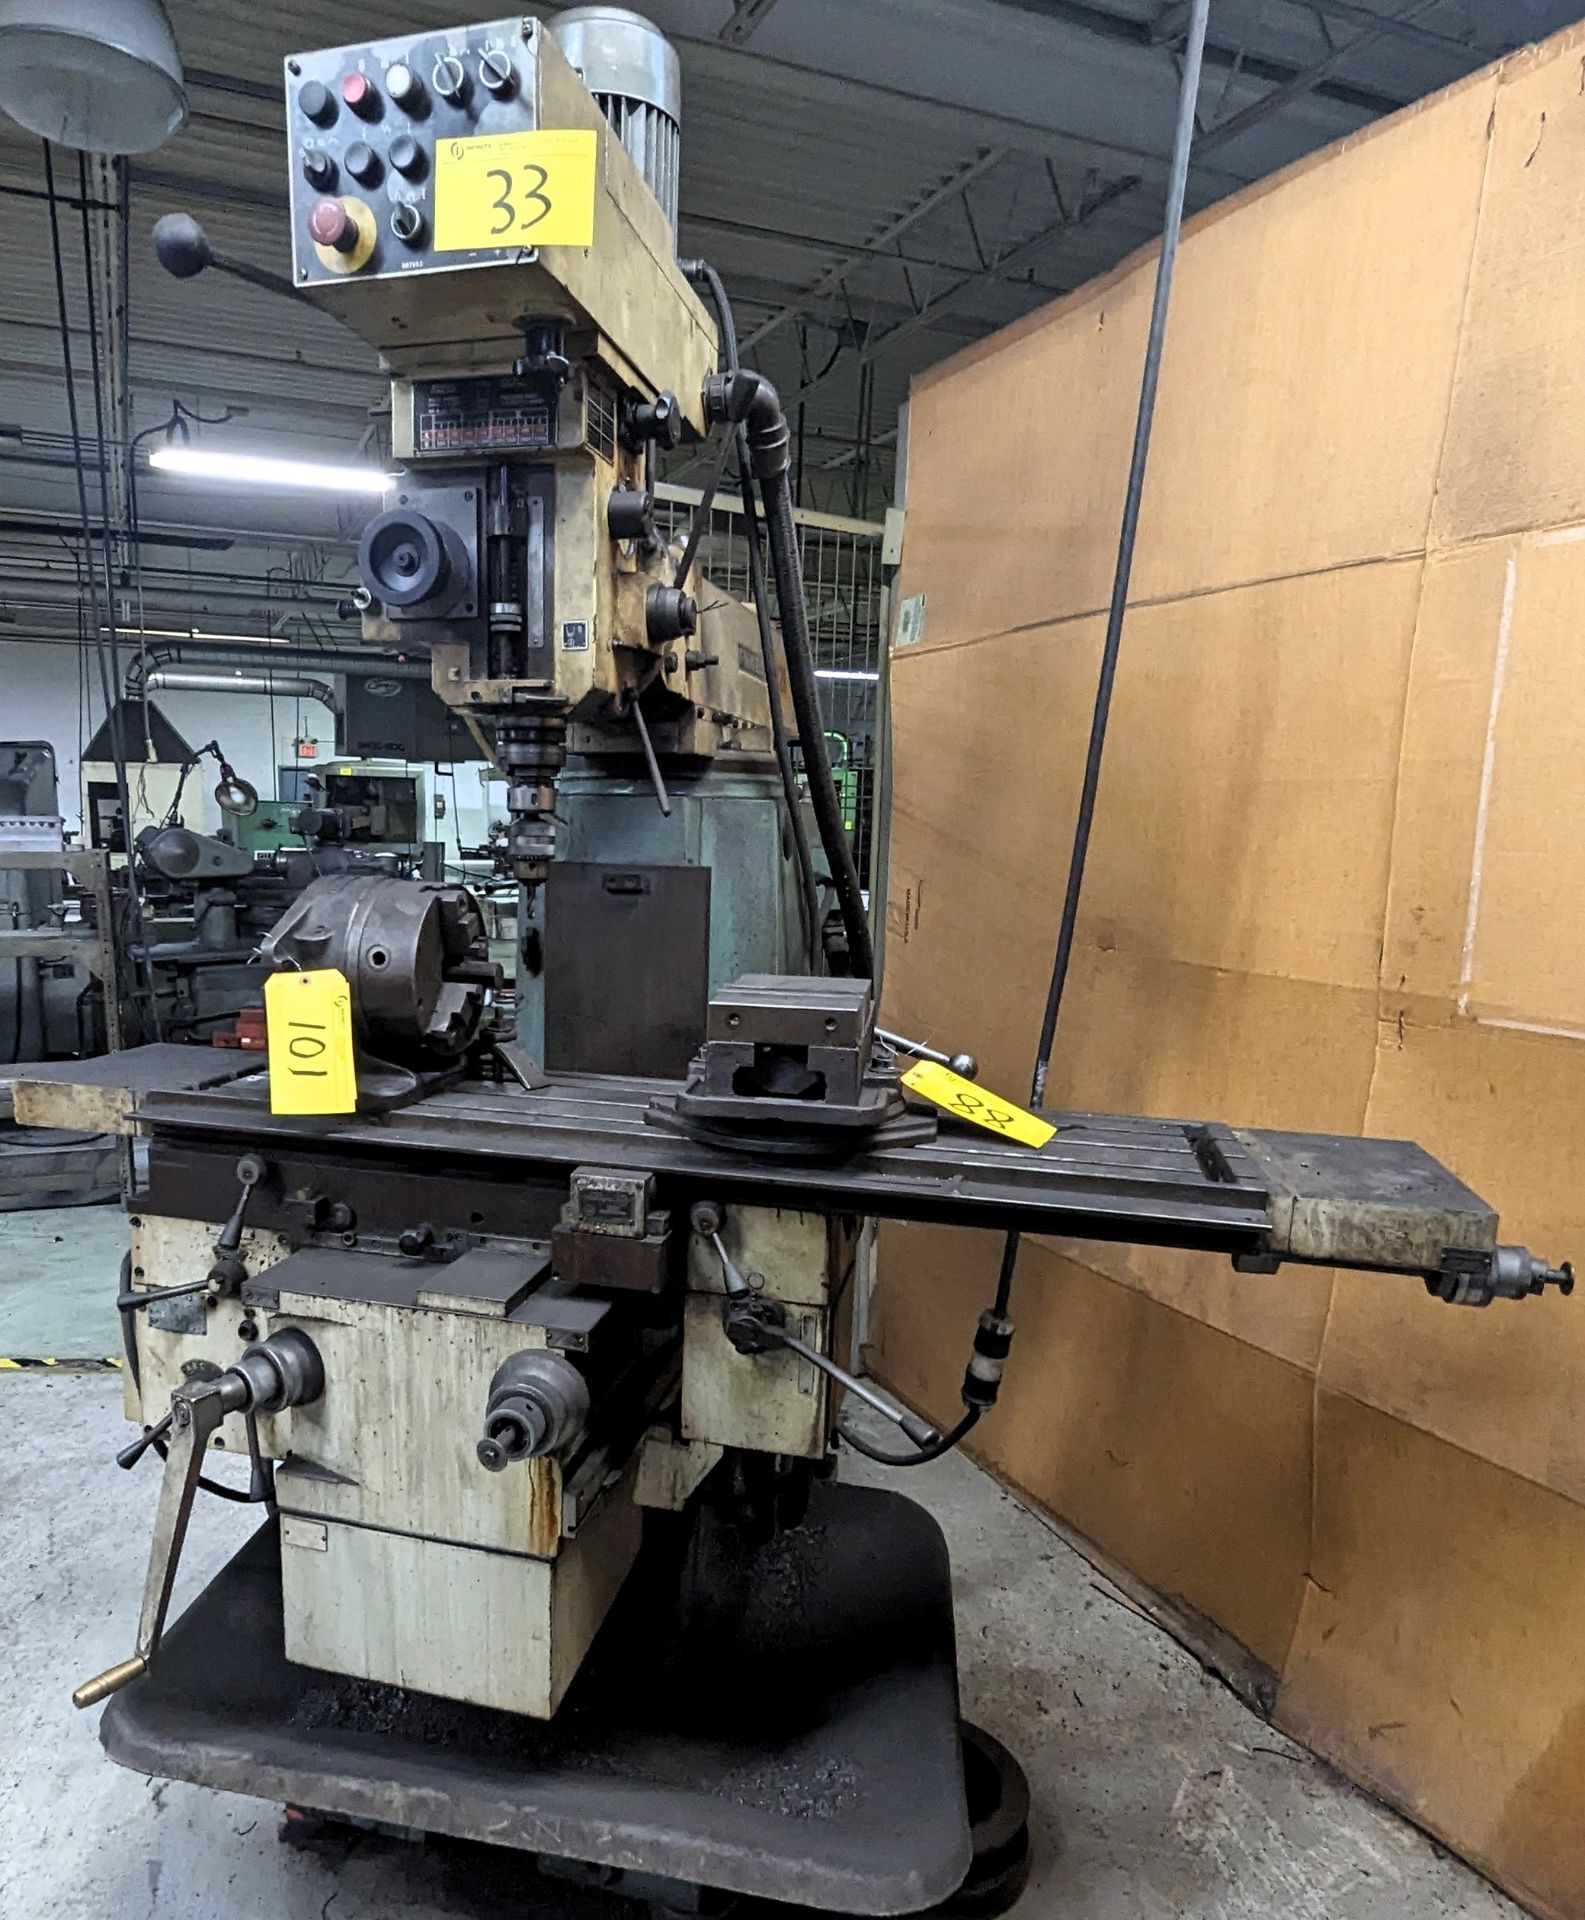 TOS FNK 25A VERTICAL MILLING MACHINE, 12” X 49” TABLE, SPEEDS TO 4,500 RPM (NO VISE OR ROTARY